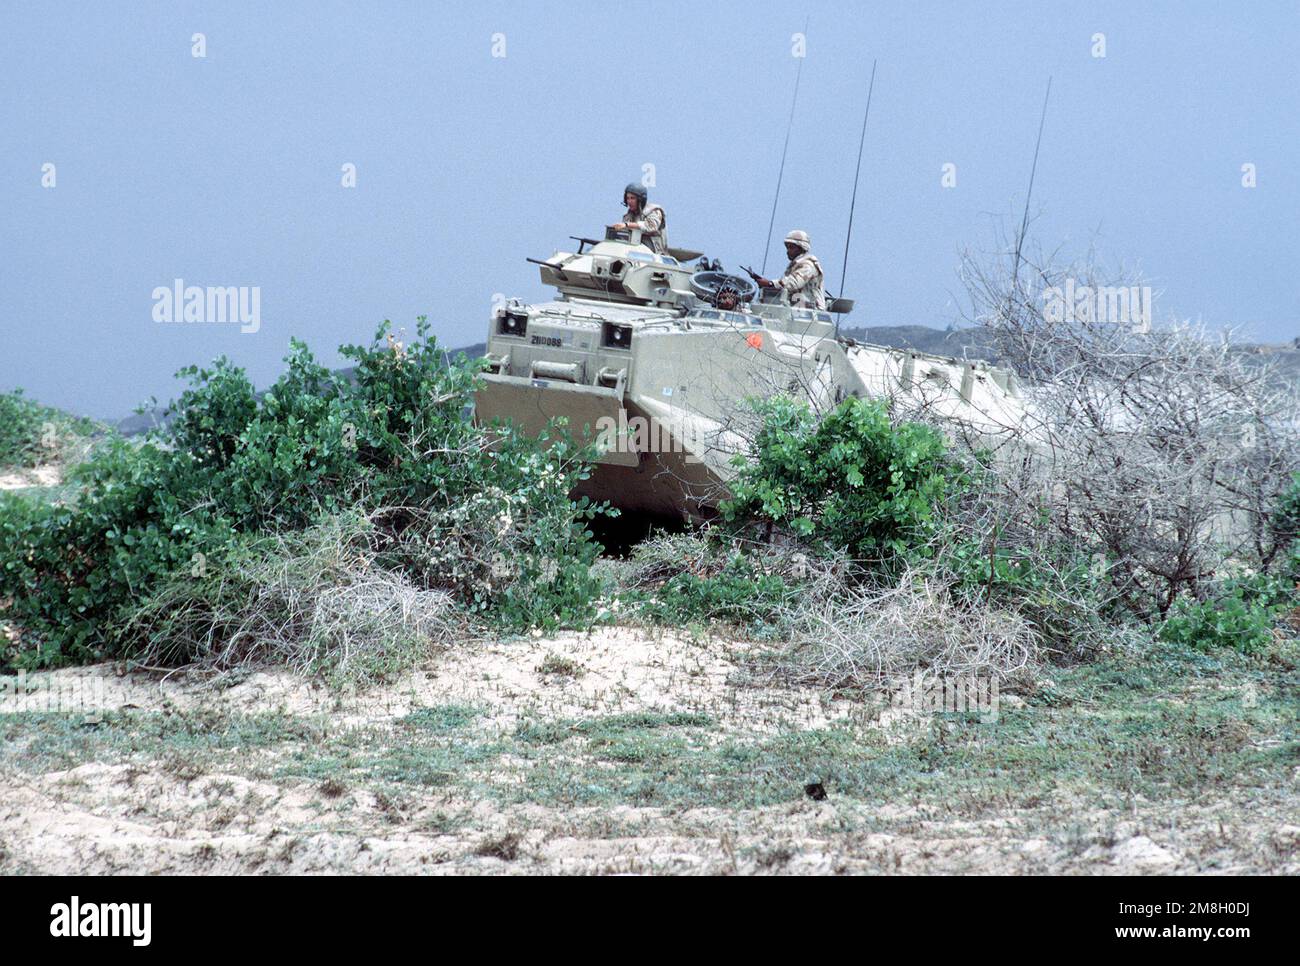 A 15th Marine Exeditionary Unit AAV-7A1 amphibious assault vehicle drives through some brush during the multinational relief effort Operation Restore Hope. Base: Modadishu Country: Somalia (SOM) Stock Photo